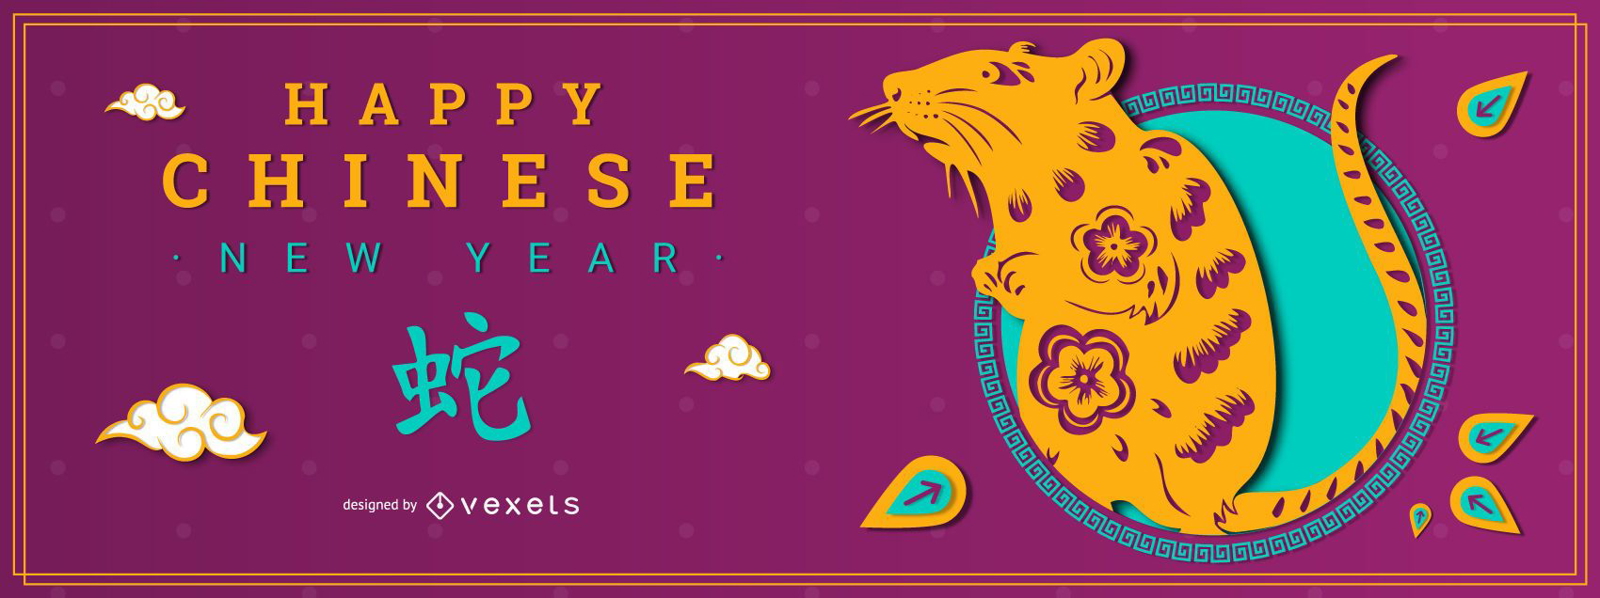 Happy Chinese New Year Banner Vector Download